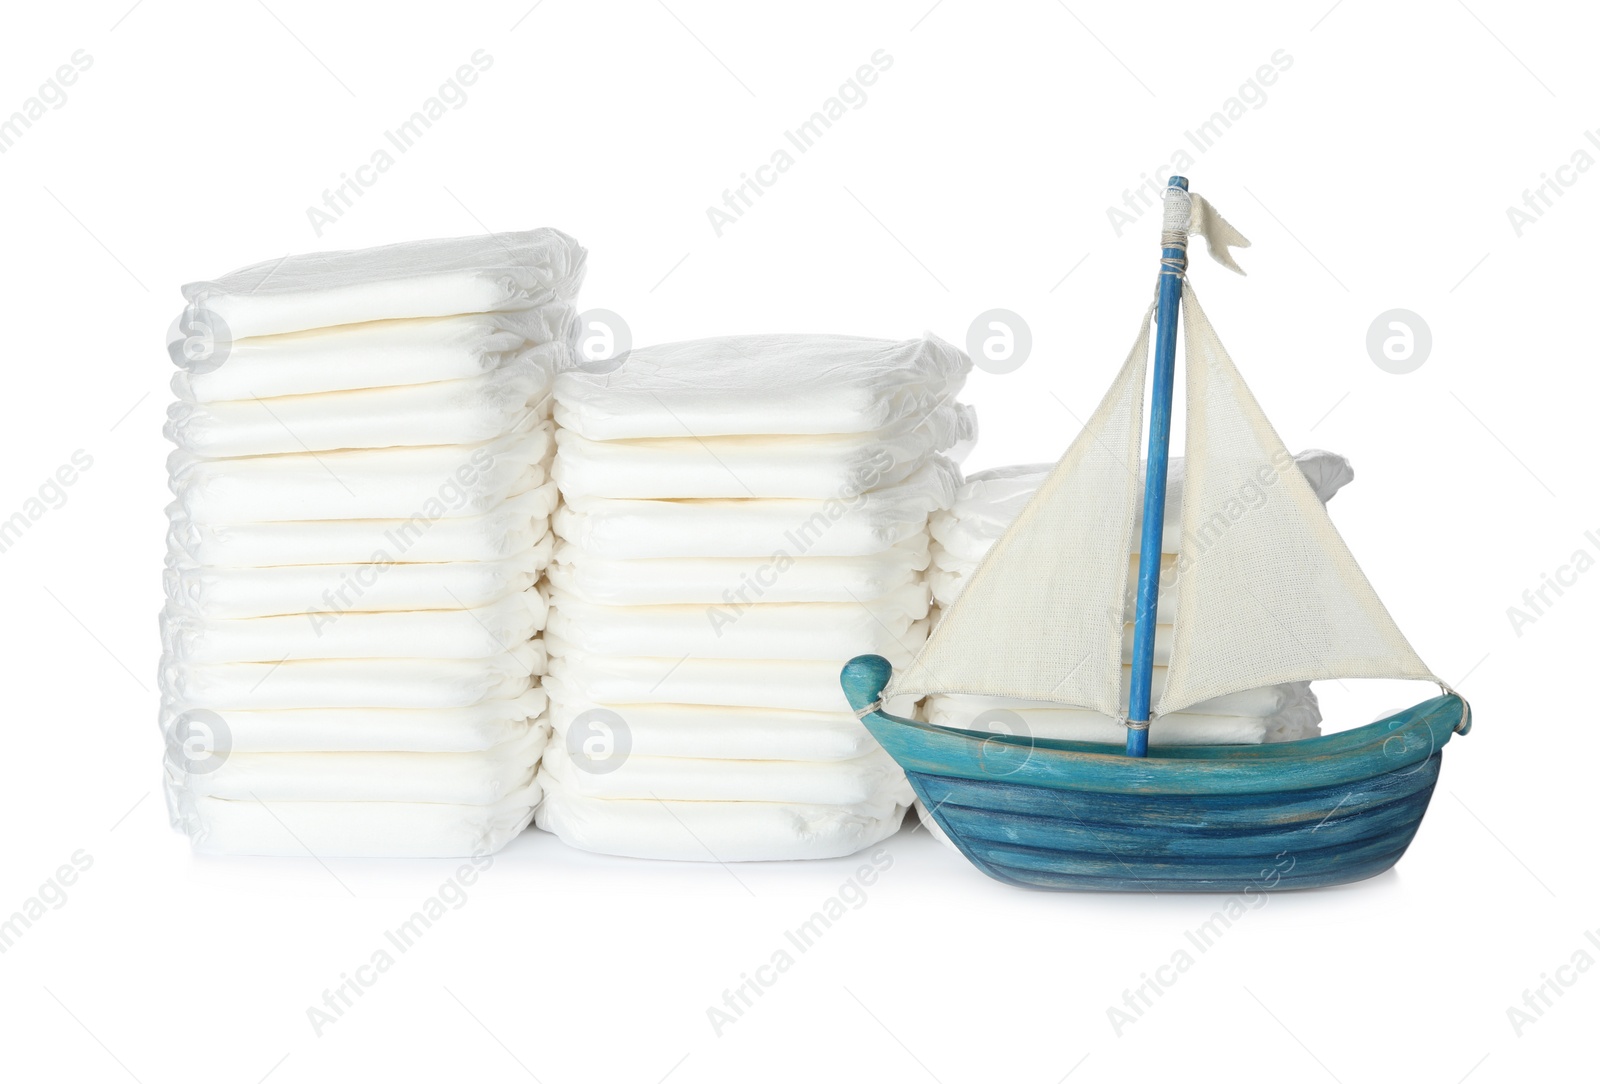 Photo of Disposable diapers and toy sailboat on white background